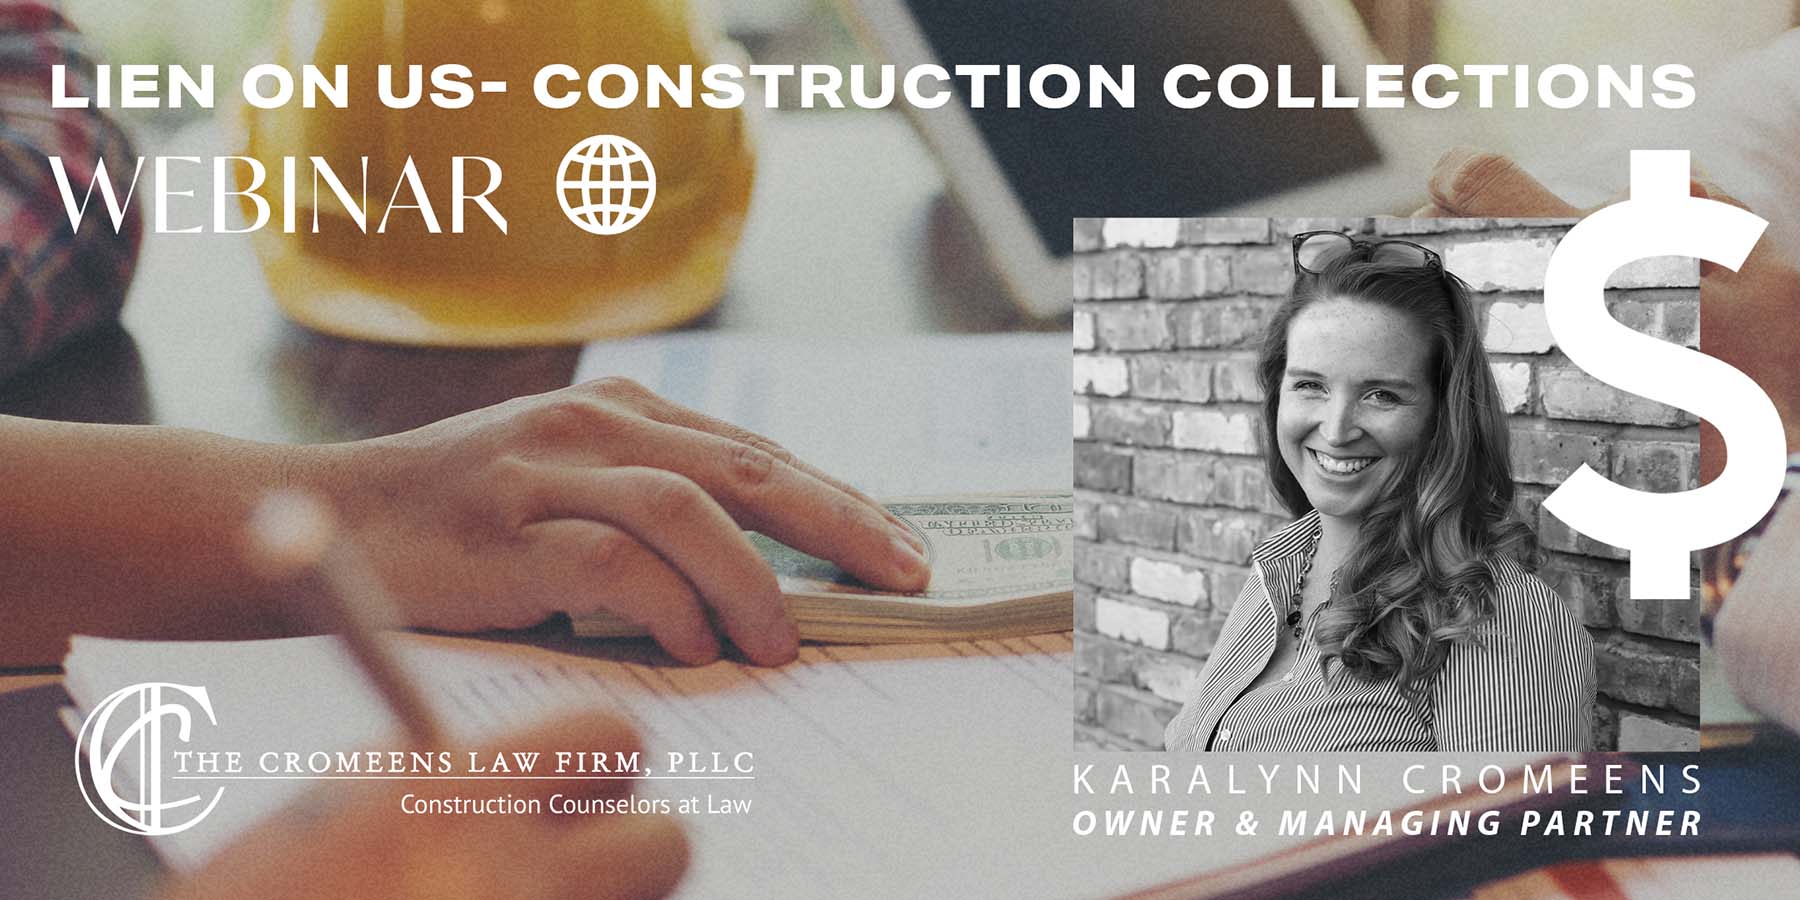 Lien on us construction collections webinar